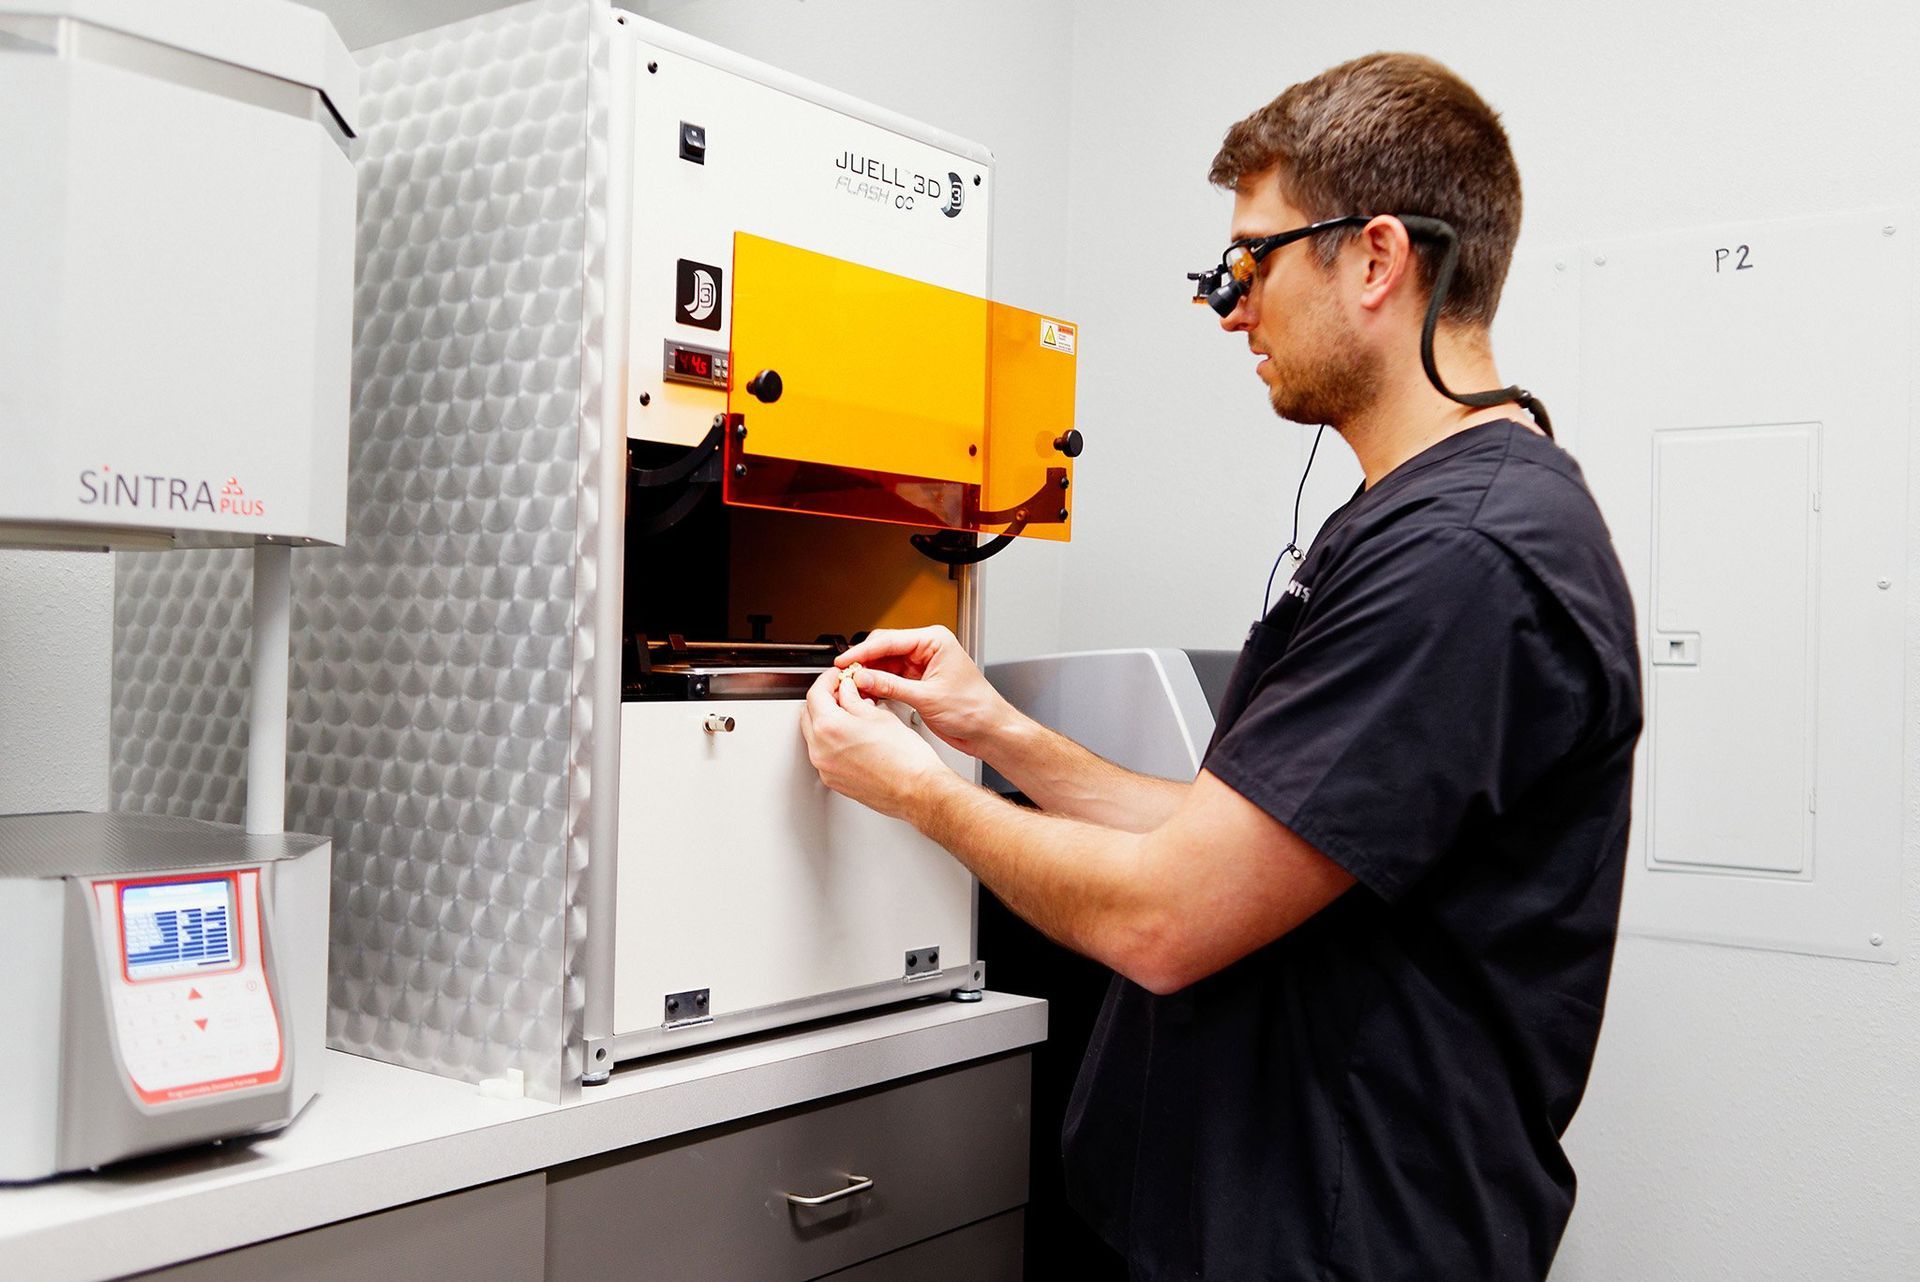 A man wearing glasses is working on a machine in a lab.